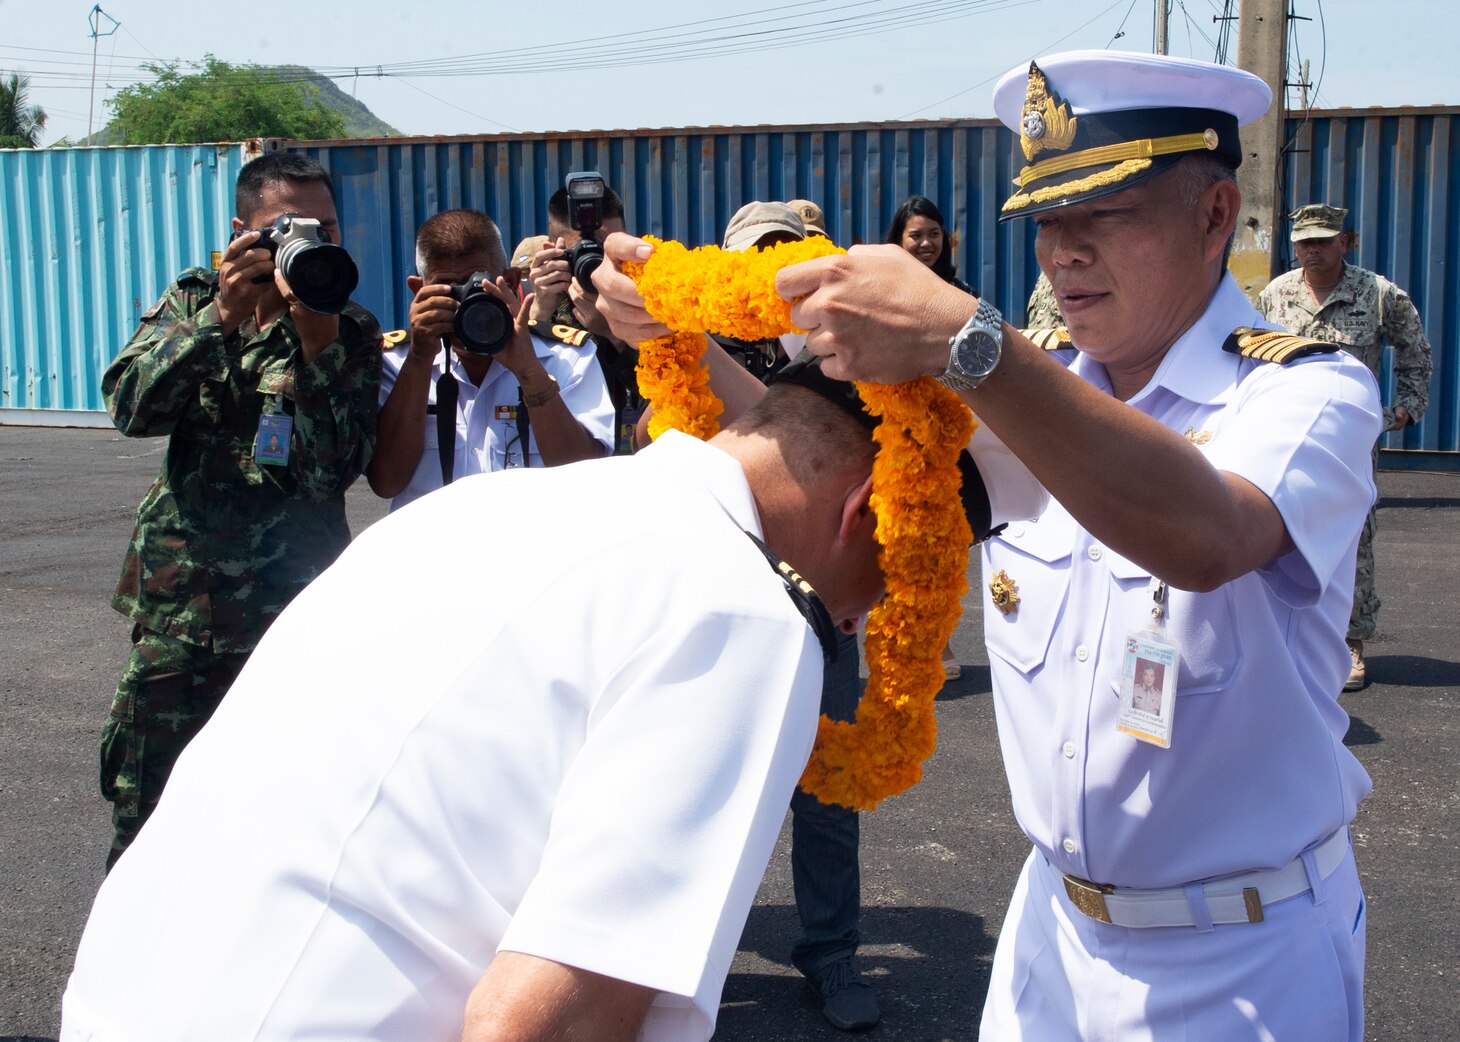 Sattahip, Thailand (May 18, 2019) – Royal Thai Navy Capt. Jakaphan Suwannasawad, chief of Chuk Samed Pier, gifts a lei to U.S. Navy Lt. Cmdr. Nick Lyons, Pacific Partnership 2019 operations officer, following the arrival of fast expeditionary transport ship USNS Fall River (T-EPF 4) in Thailand. Pacific Partnership, now in its 14th iteration, is the largest annual multinational humanitarian assistance and disaster relief preparedness mission conducted in the Indo-Pacific. Each year the mission team works collectively with host and partner nations to enhance regional interoperability and disaster response capabilities, increase security and stability in the region, and foster new and enduring friendships in the Indo-Pacific.